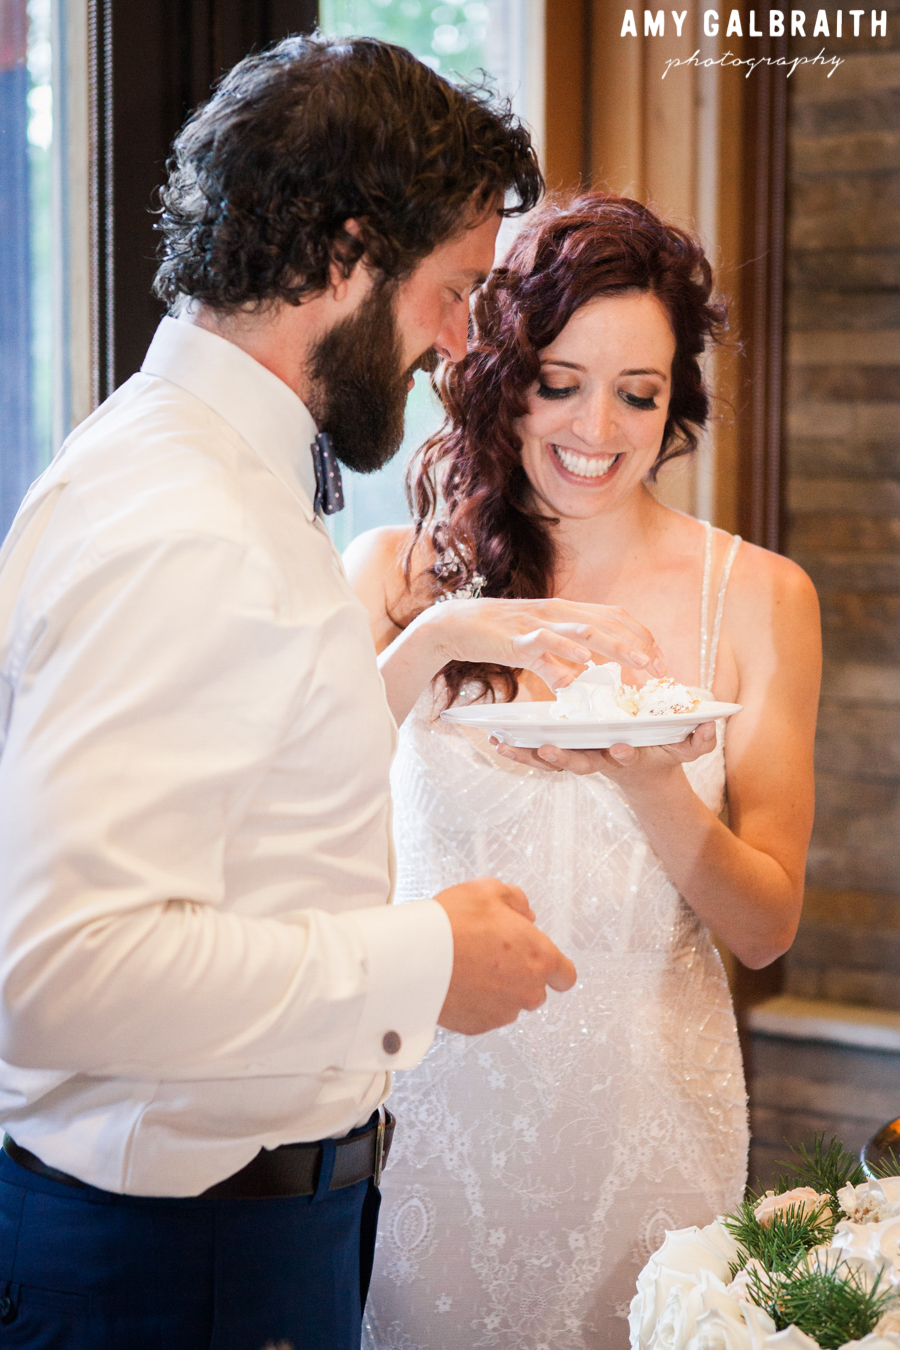 bride and groom eating cake at wedding reception